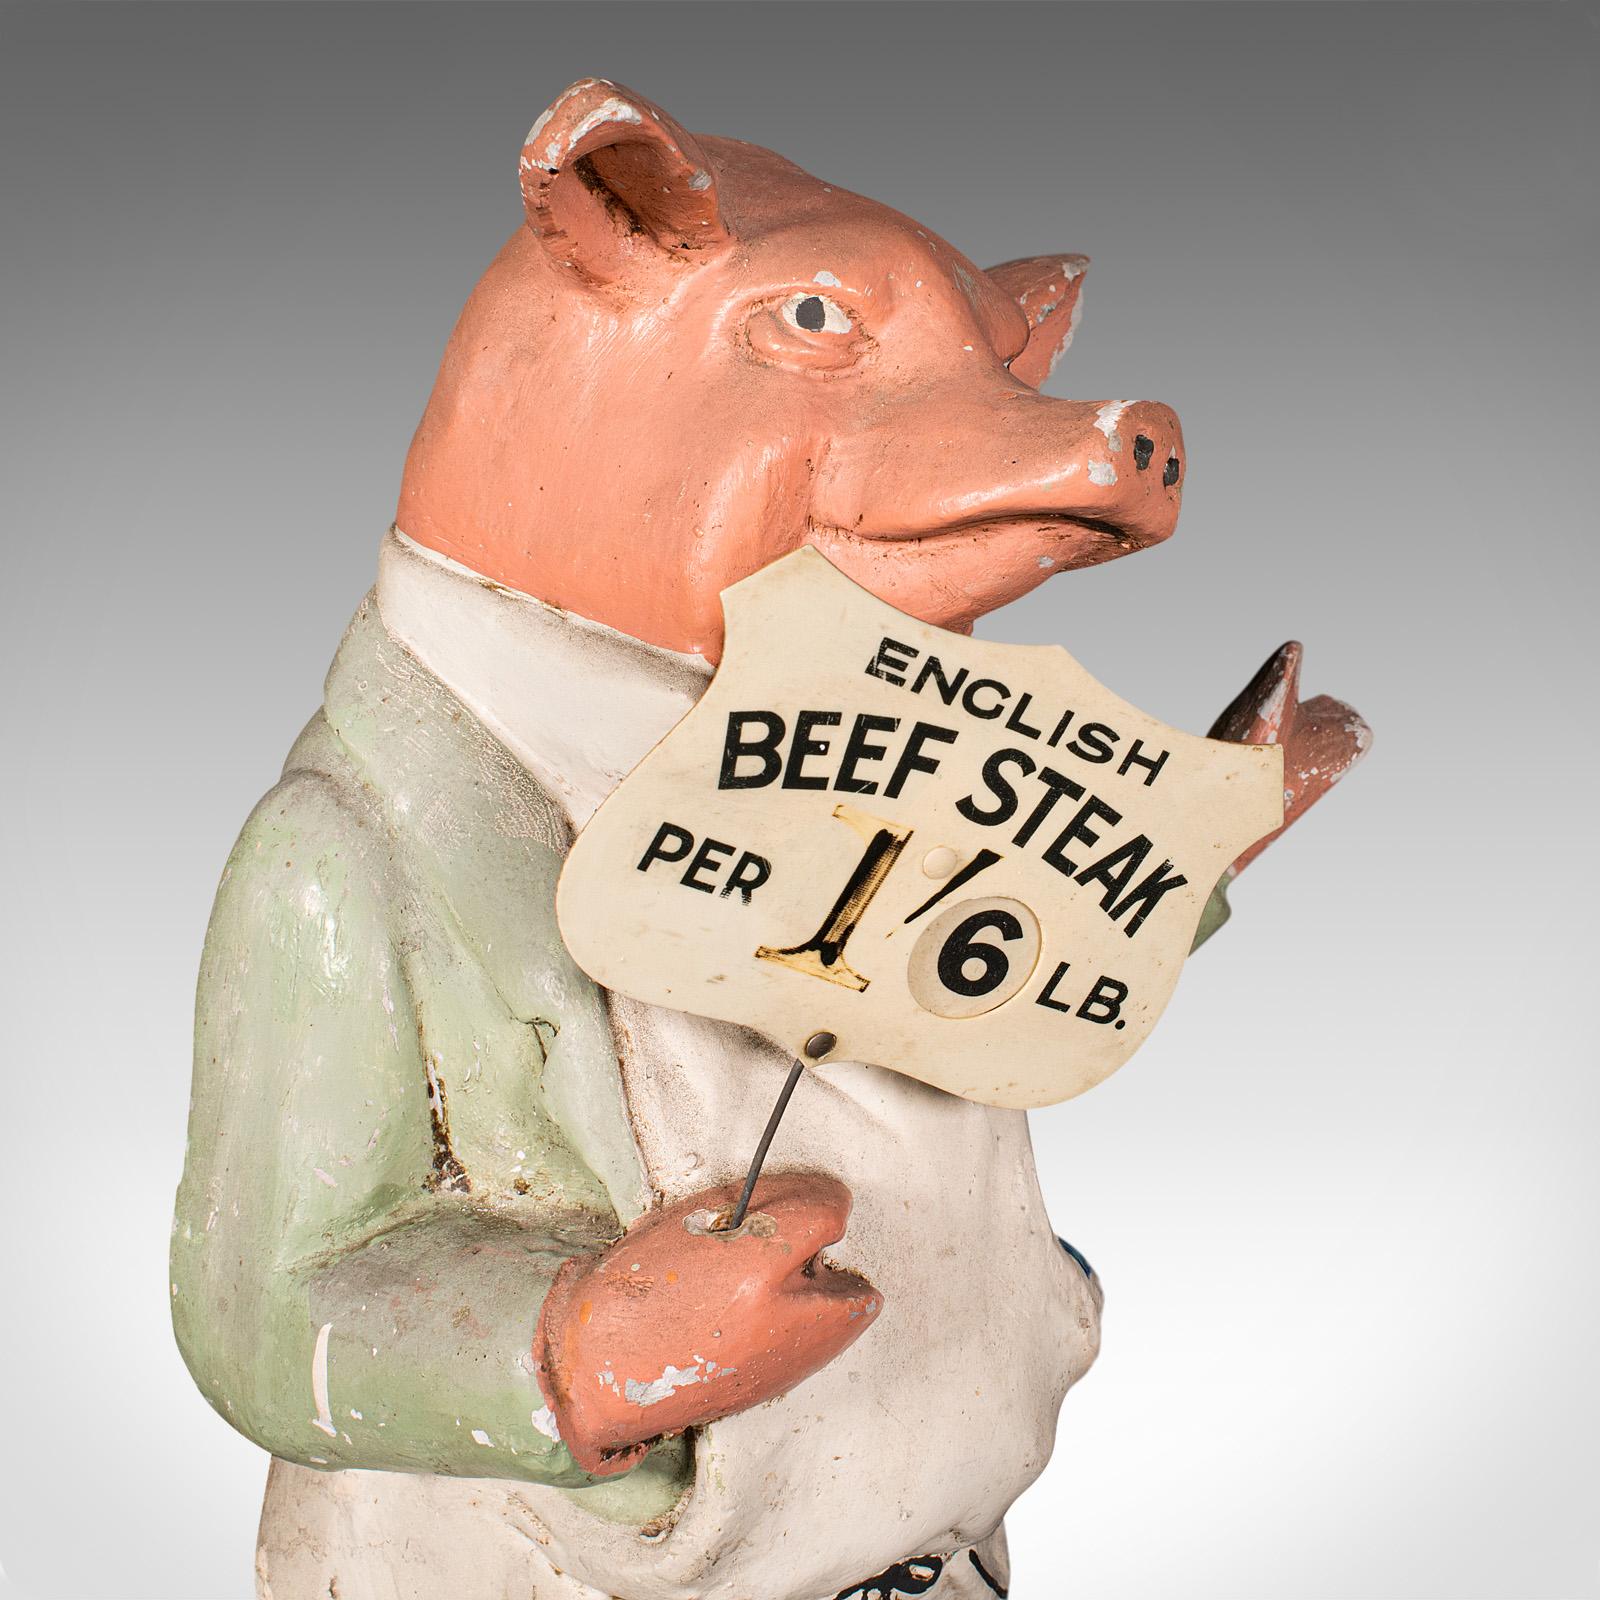 Antique Butcher's Shop Display Figure, English, Advertising, Pig, Edwardian In Good Condition For Sale In Hele, Devon, GB